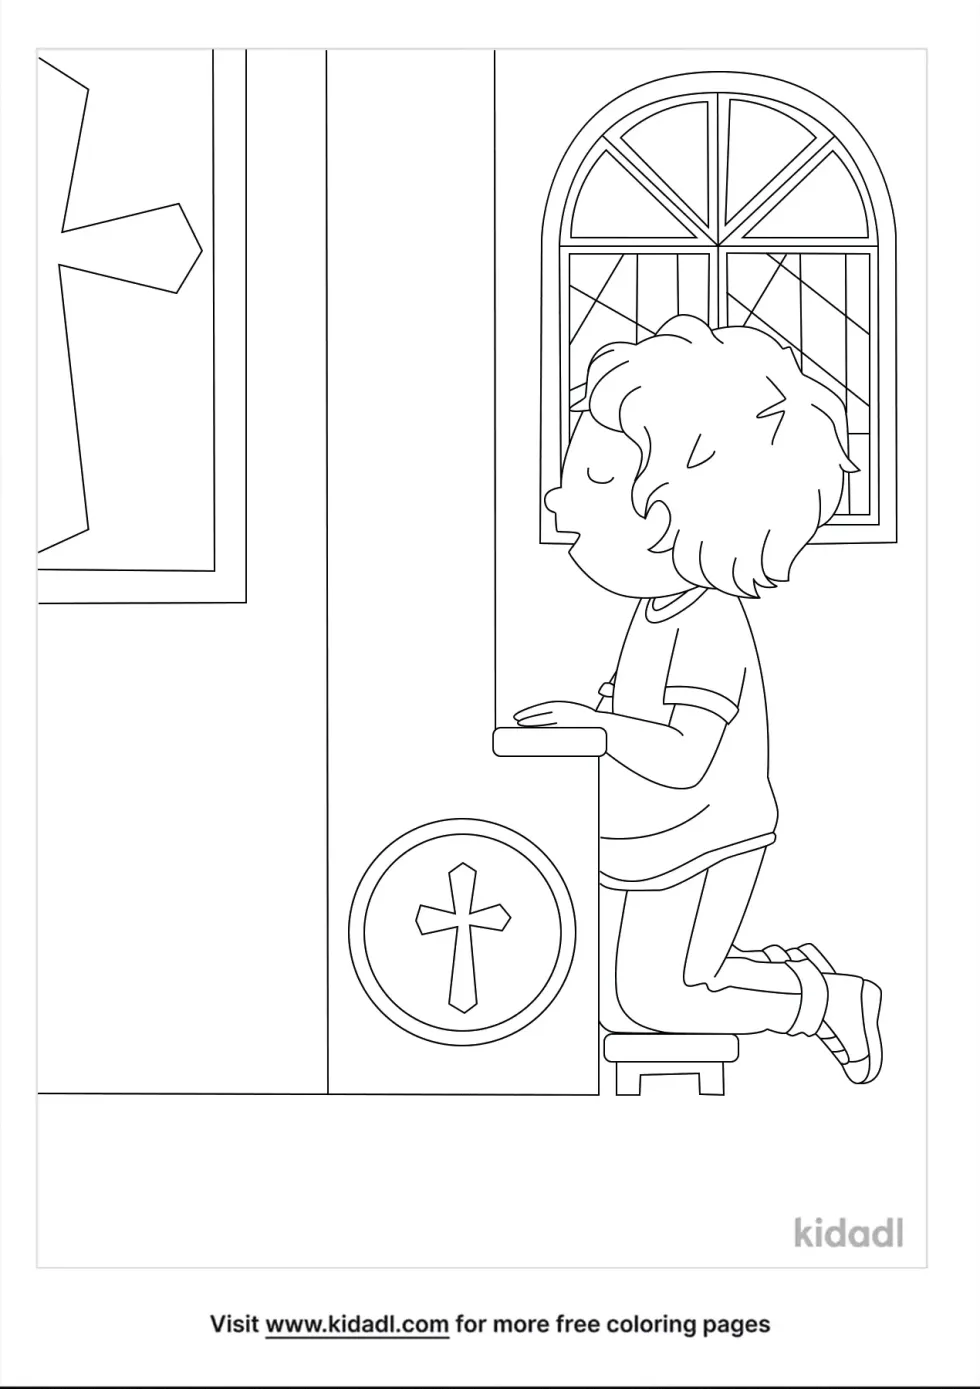 Little Boy In Church Coloring Page